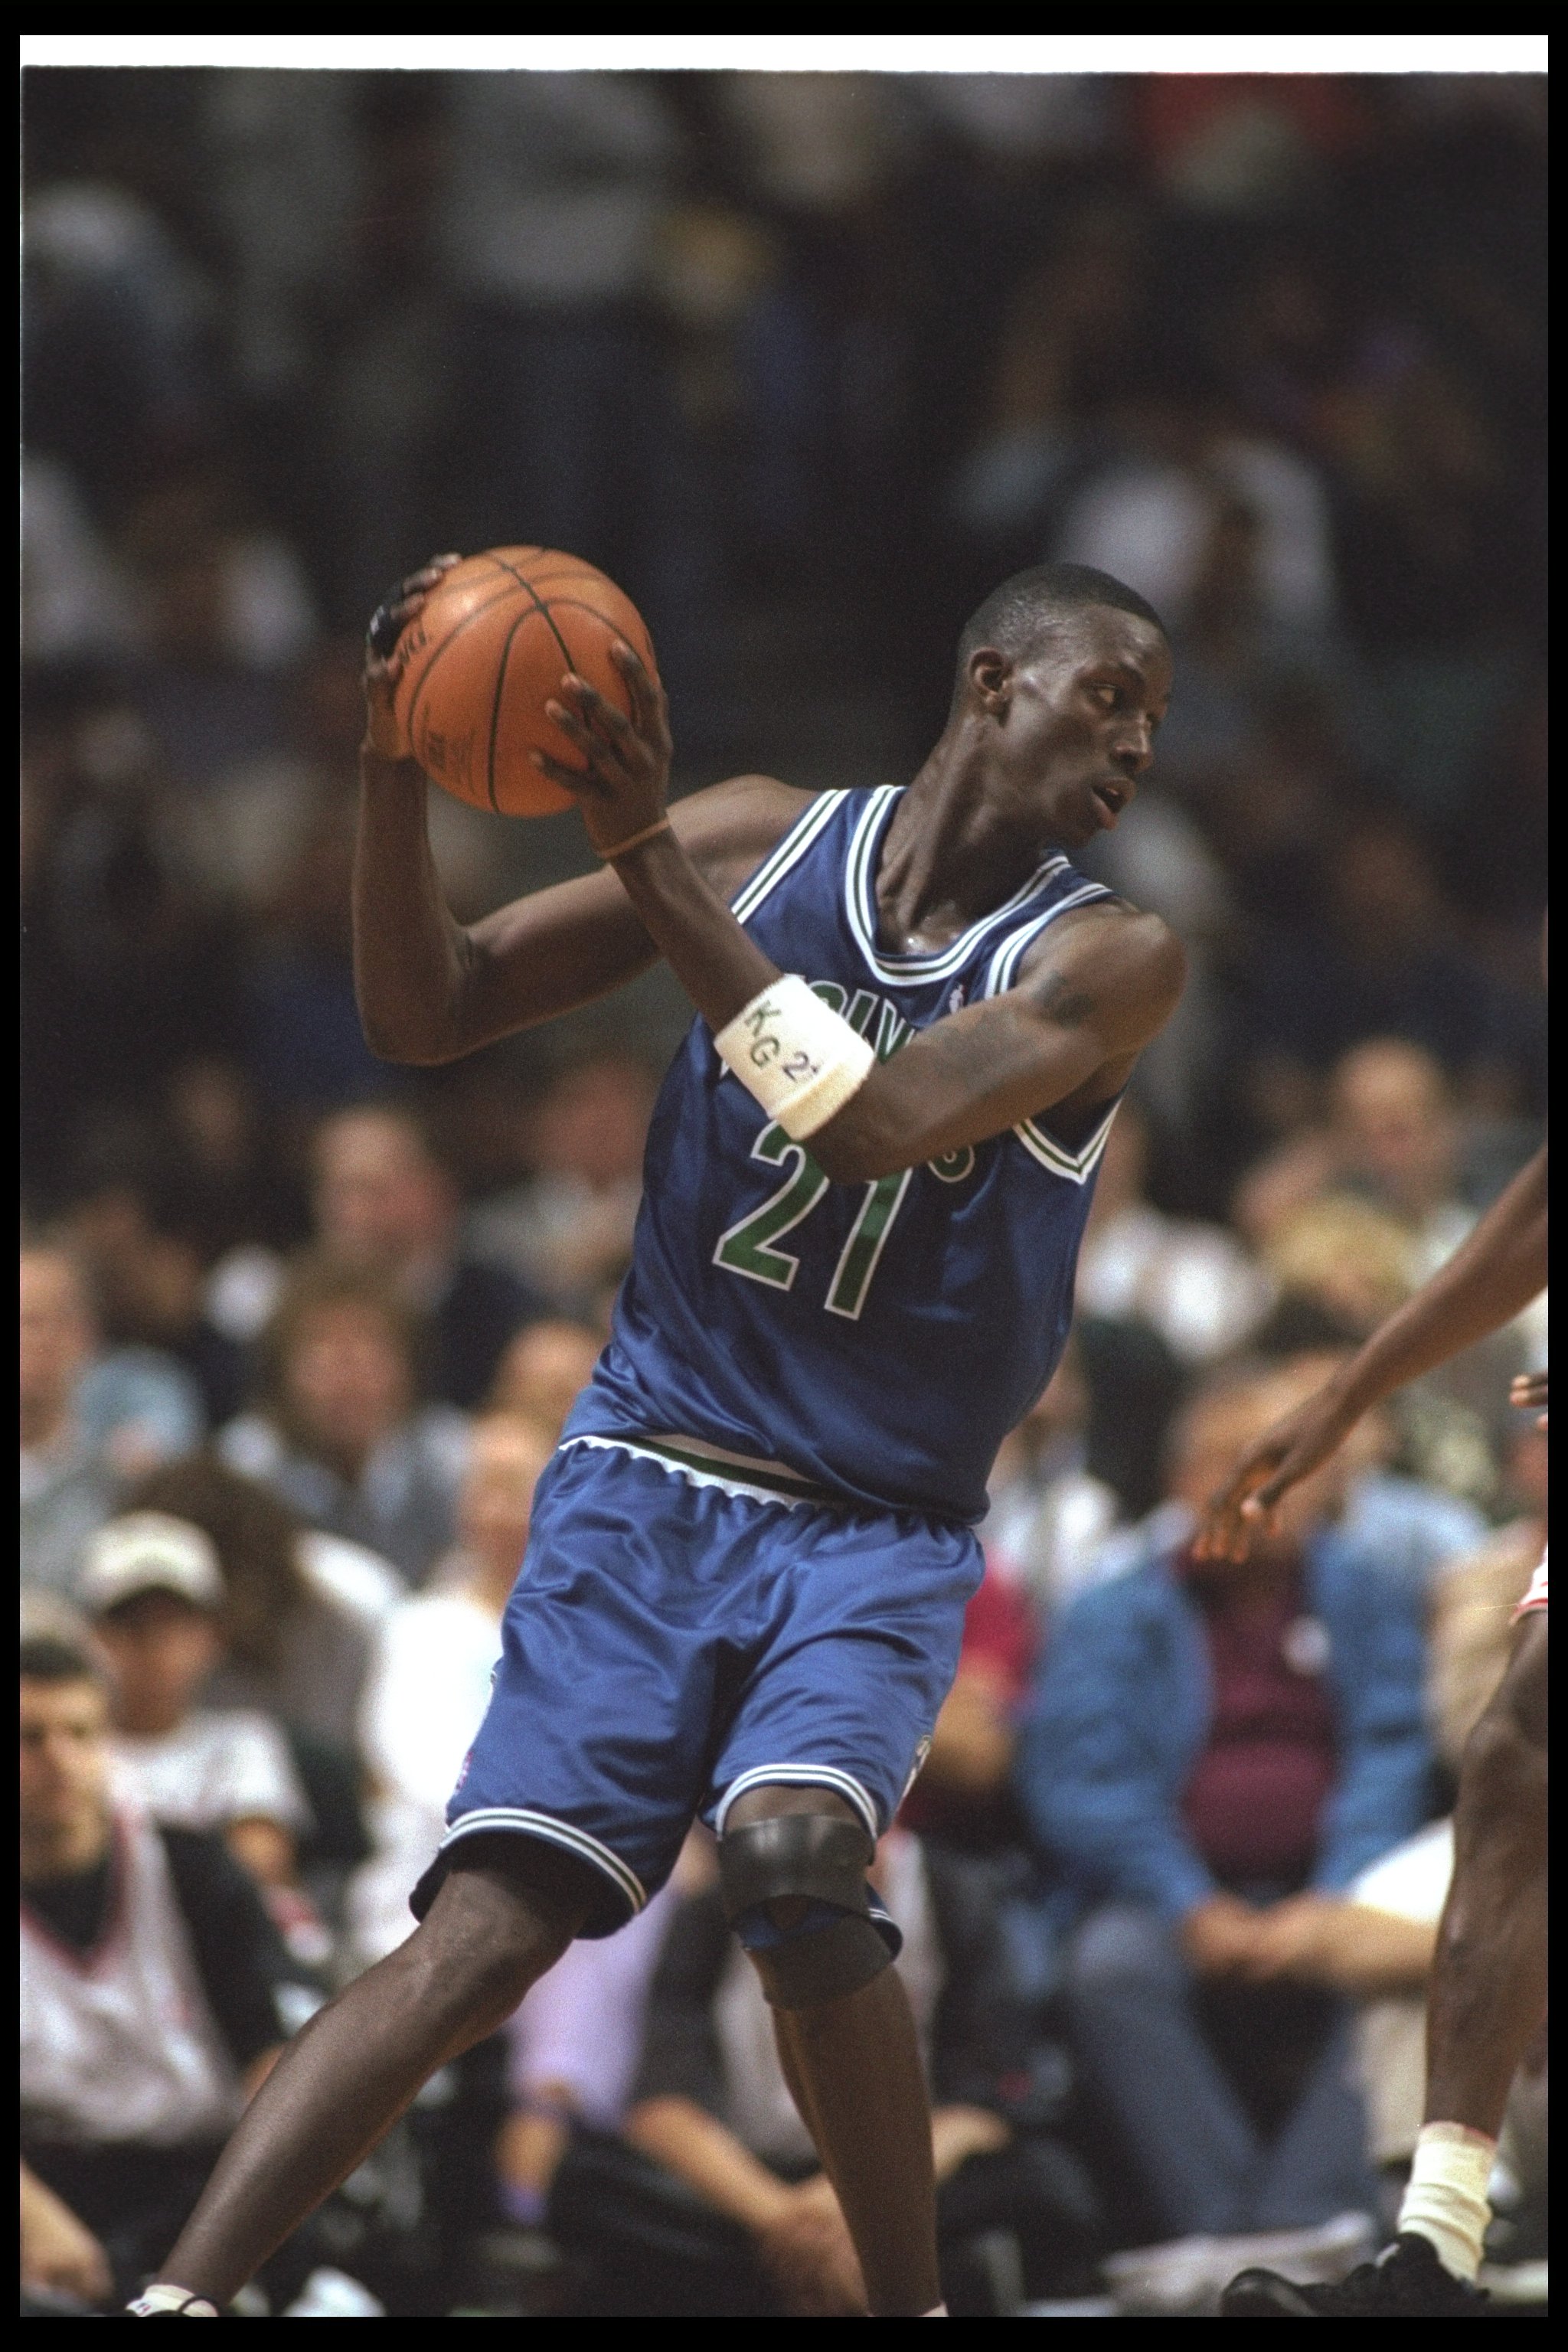 5 Mar 1996: Forward Kevin Garnett of the Minnesota Timberwolves moves the ball during a game against the Miami Heat at Miami Arena in Miami, Florida. The Heat won the game, 113-72.